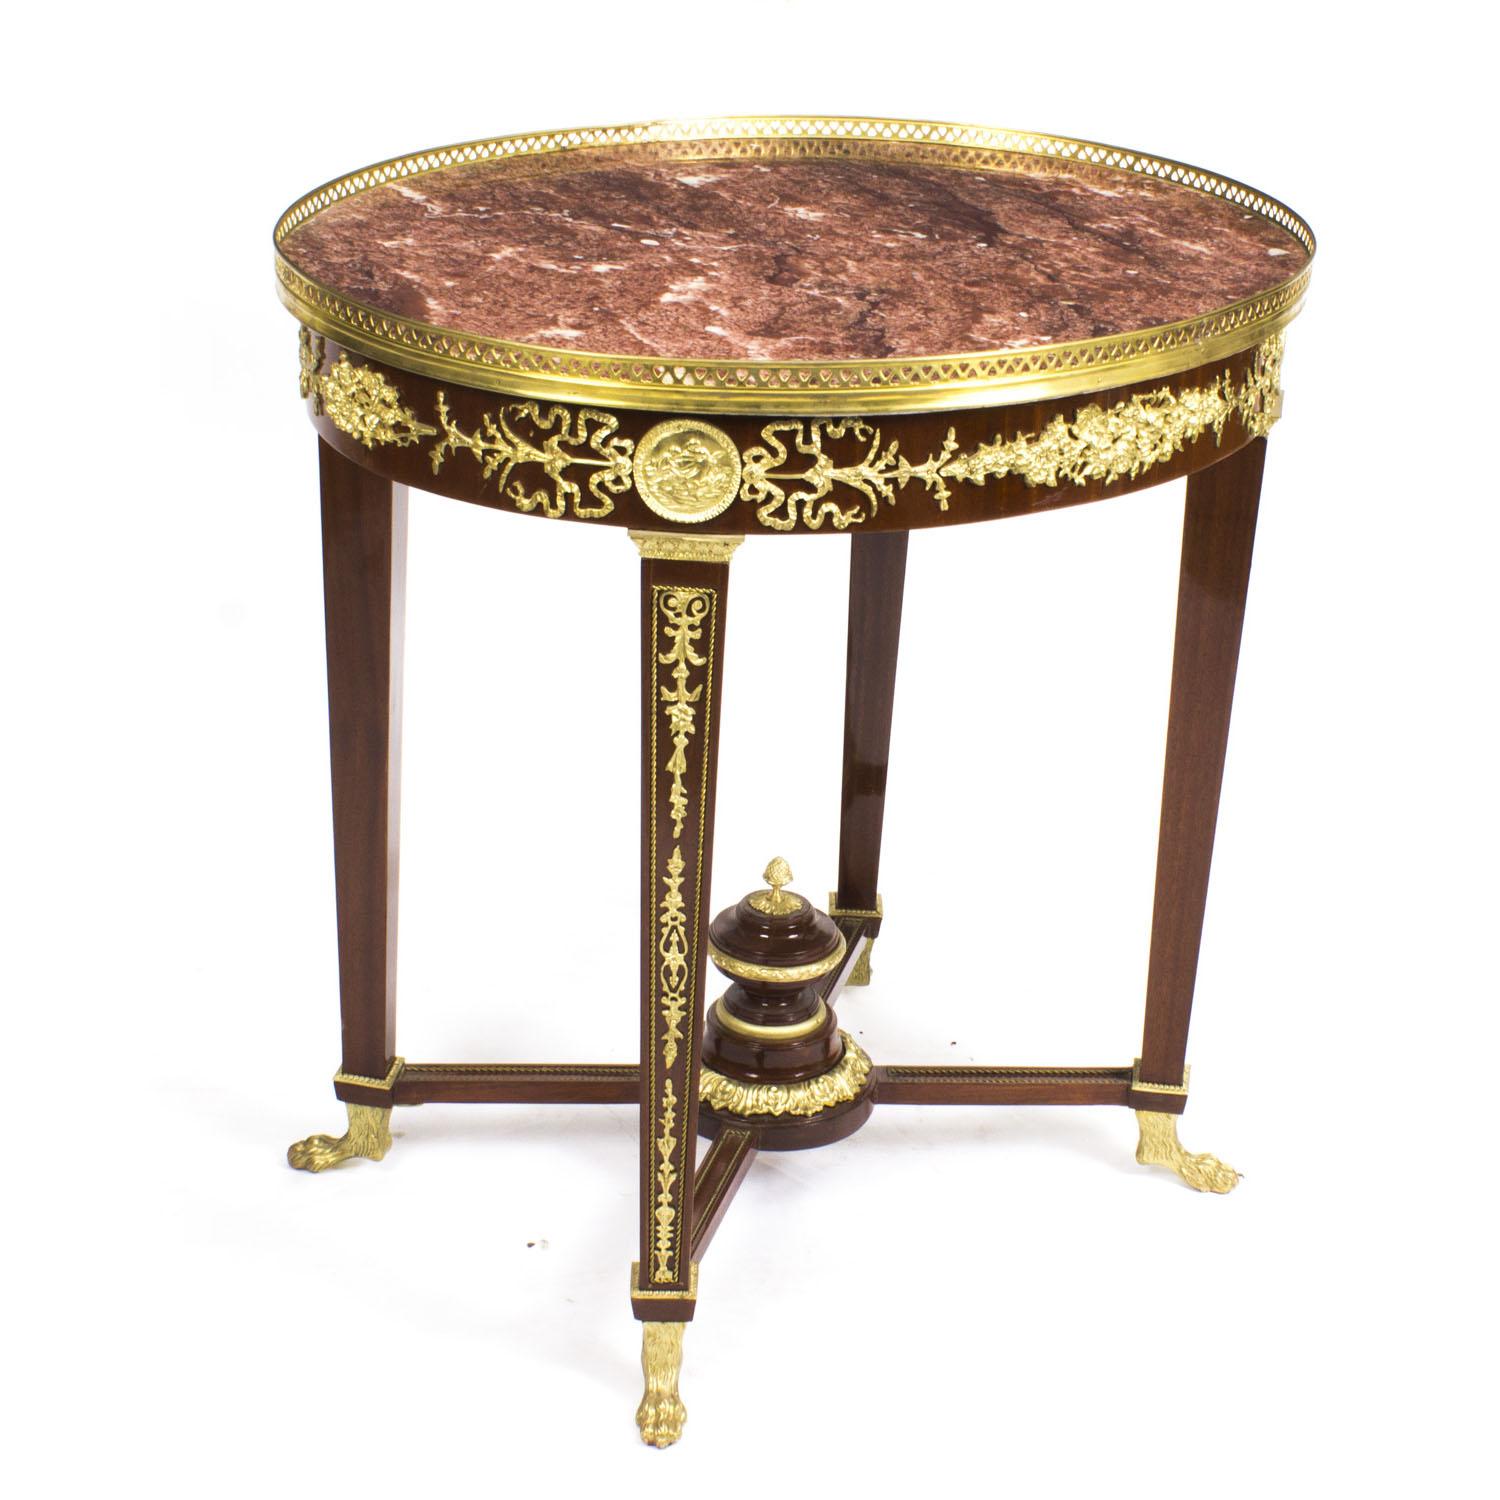 Vintage Empire Revival Marble Top Ormolu Mounted Occasional Table 20th C For Sale 7